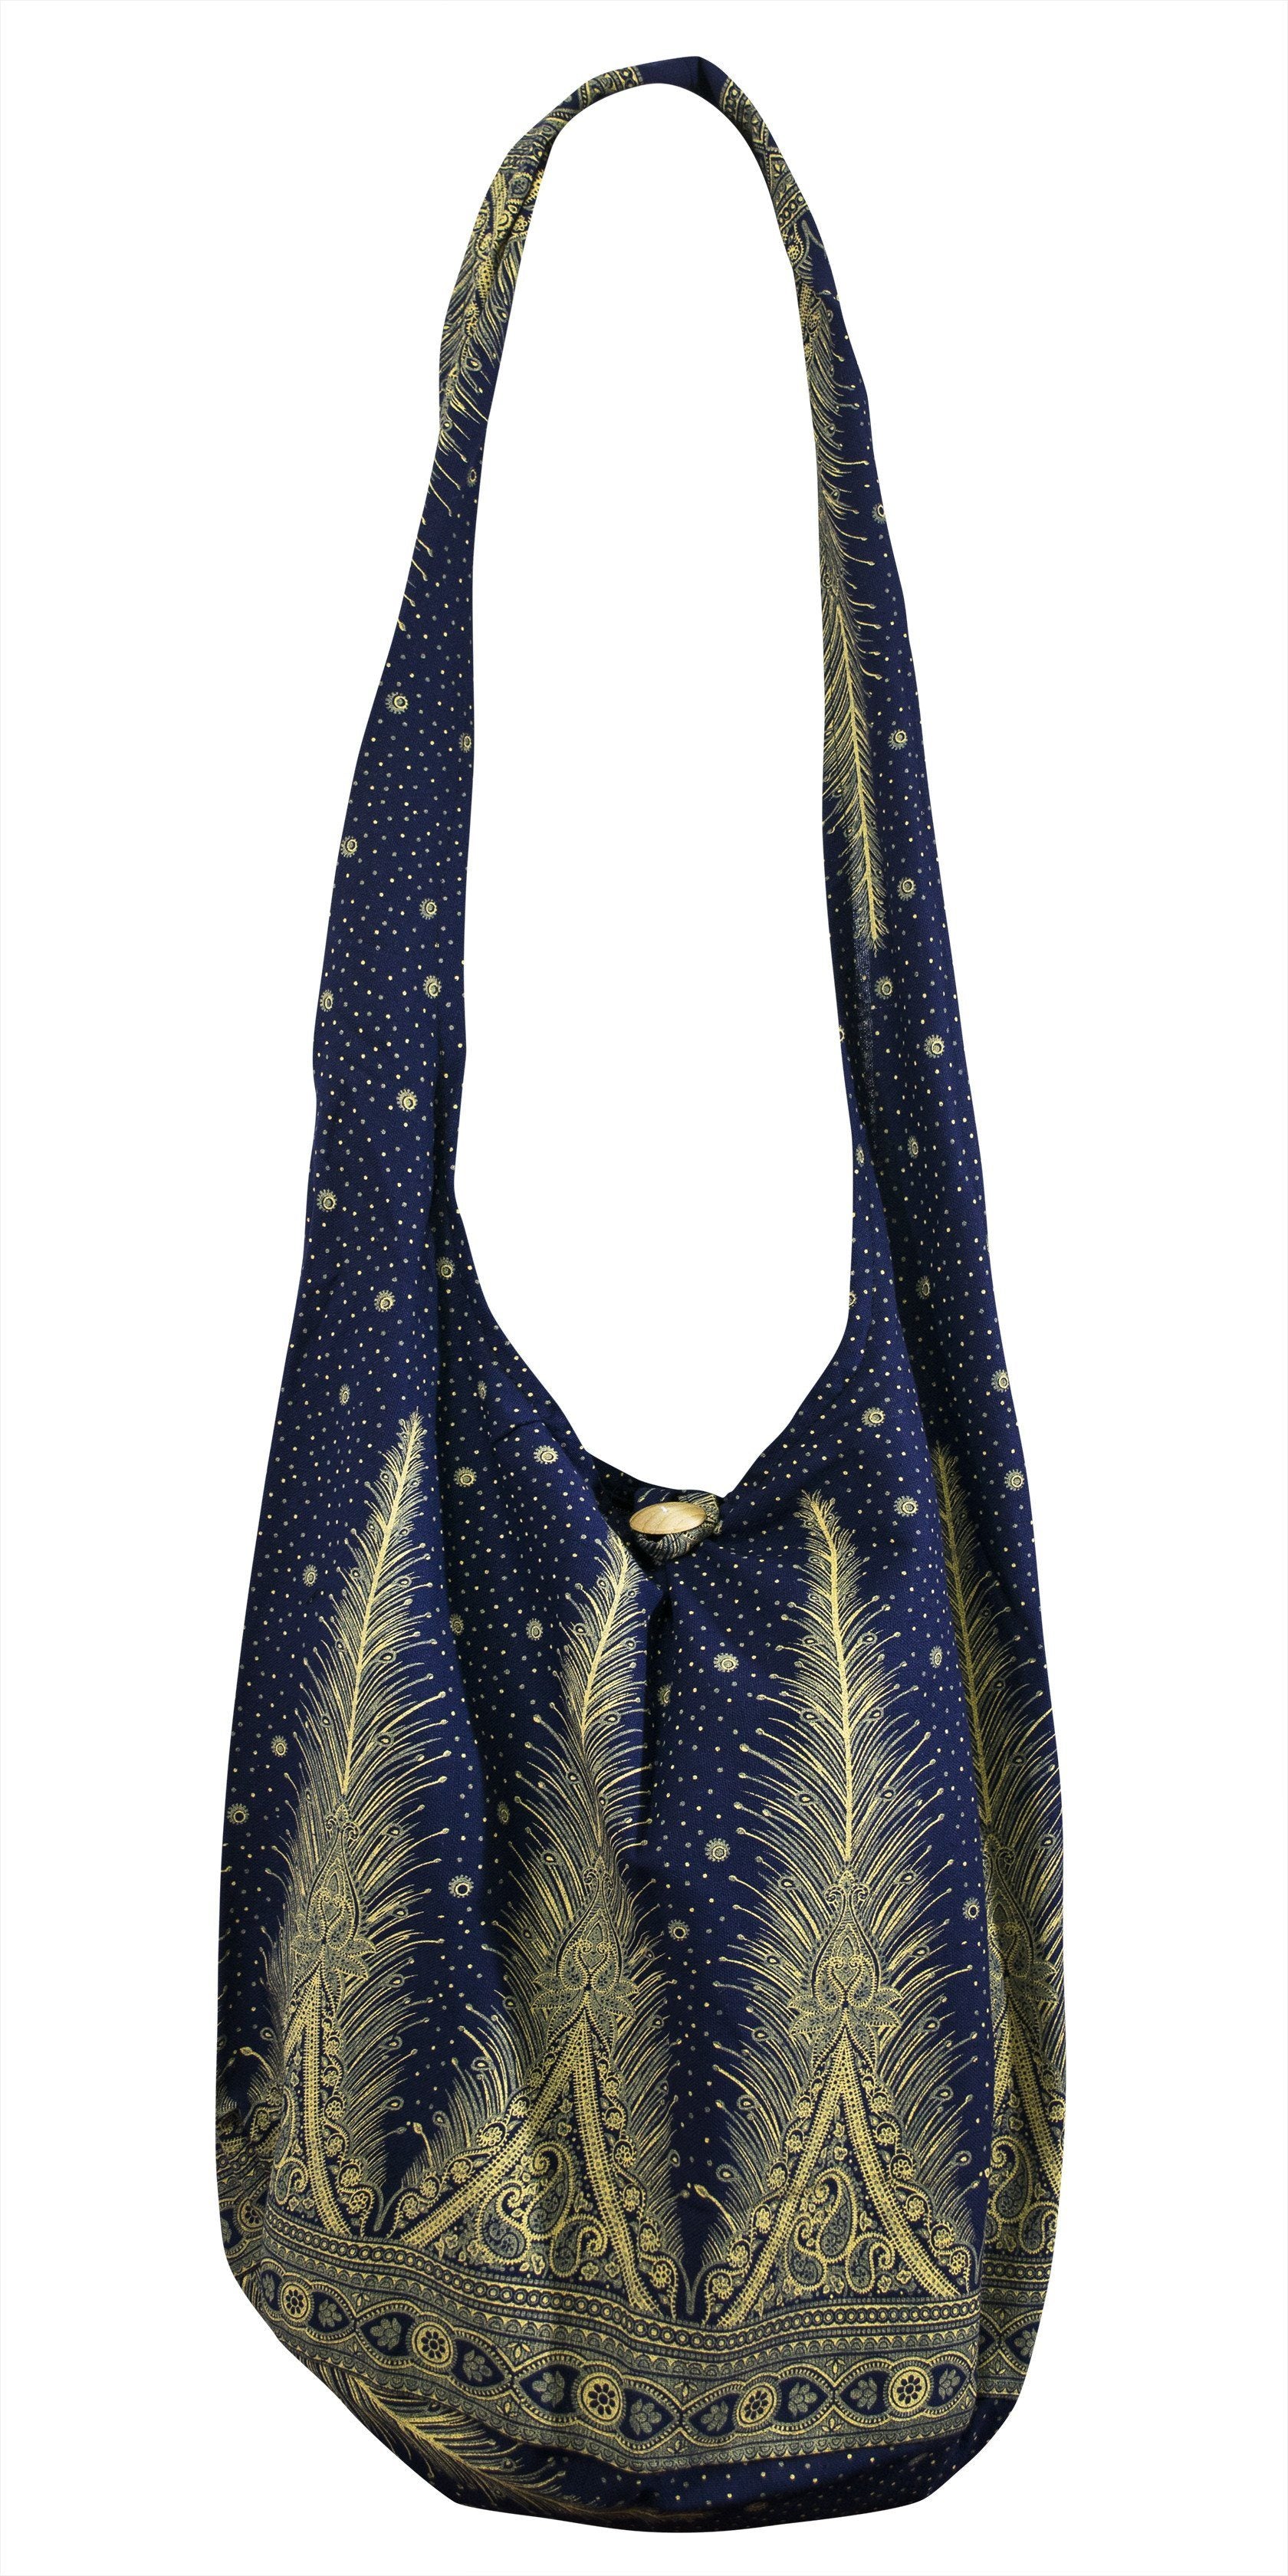 SLING GRAPHIC Feather Bag COTTON CROSS BODY bag LARGE BOHO hippie hobo - CCCollections